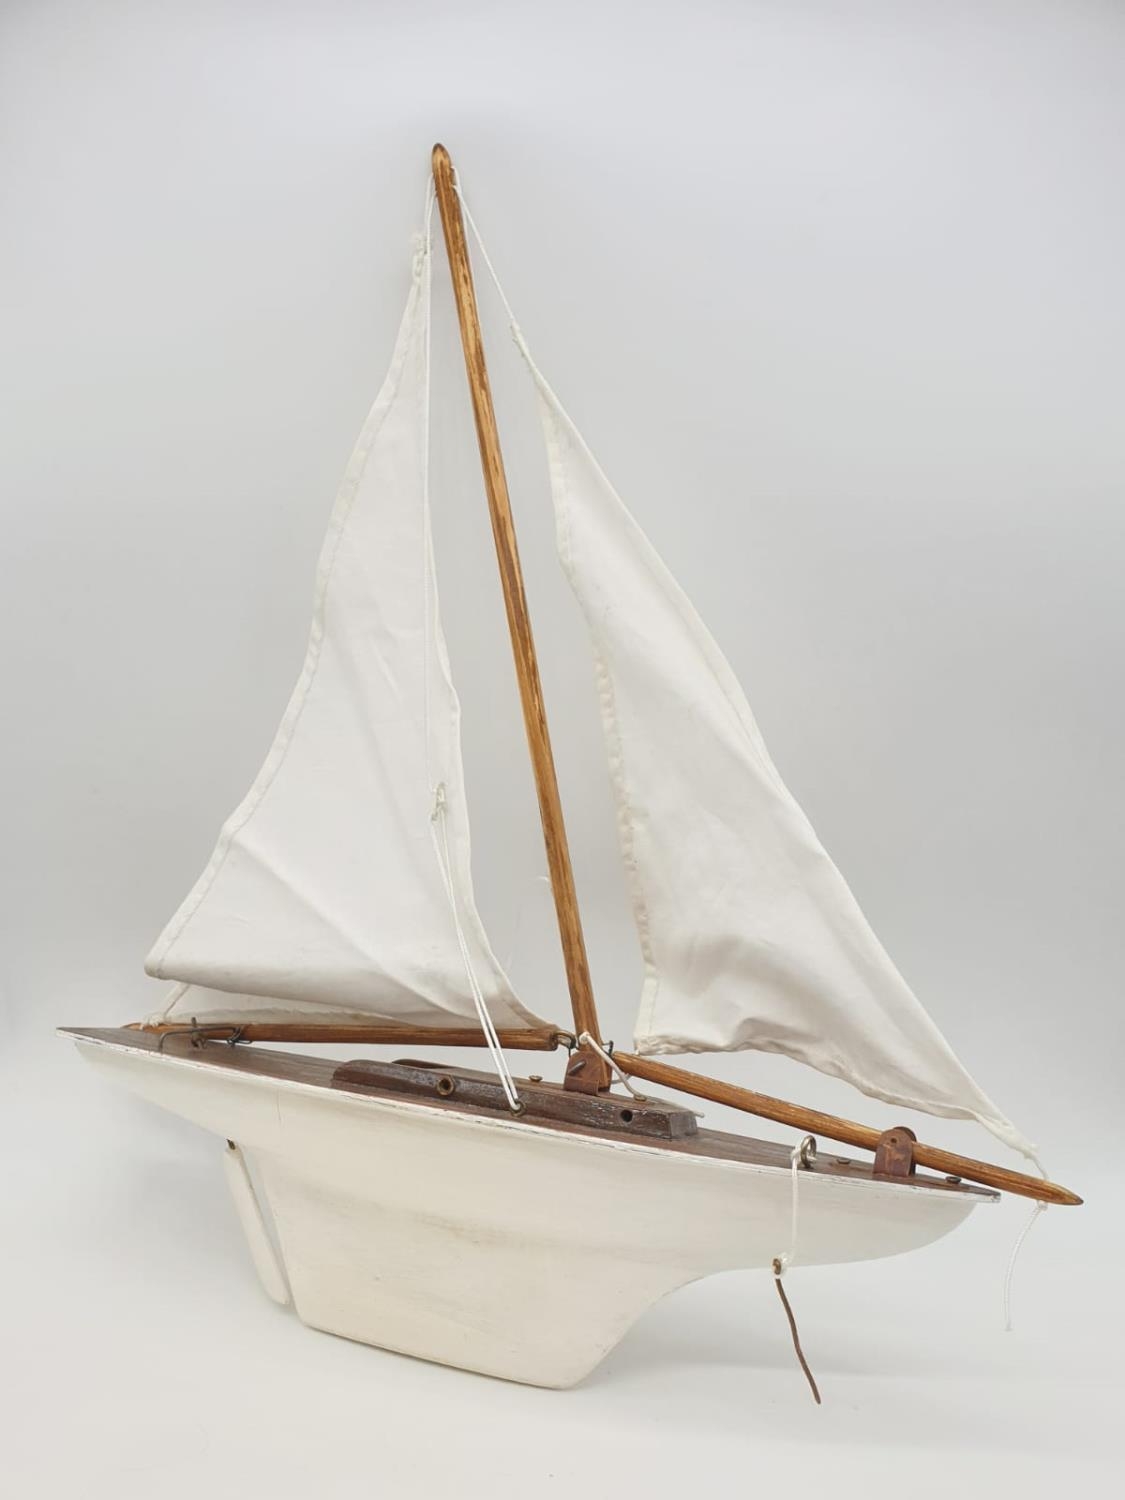 Model sailing boat with 2 sails, 40 x 48cm approx - Image 2 of 3